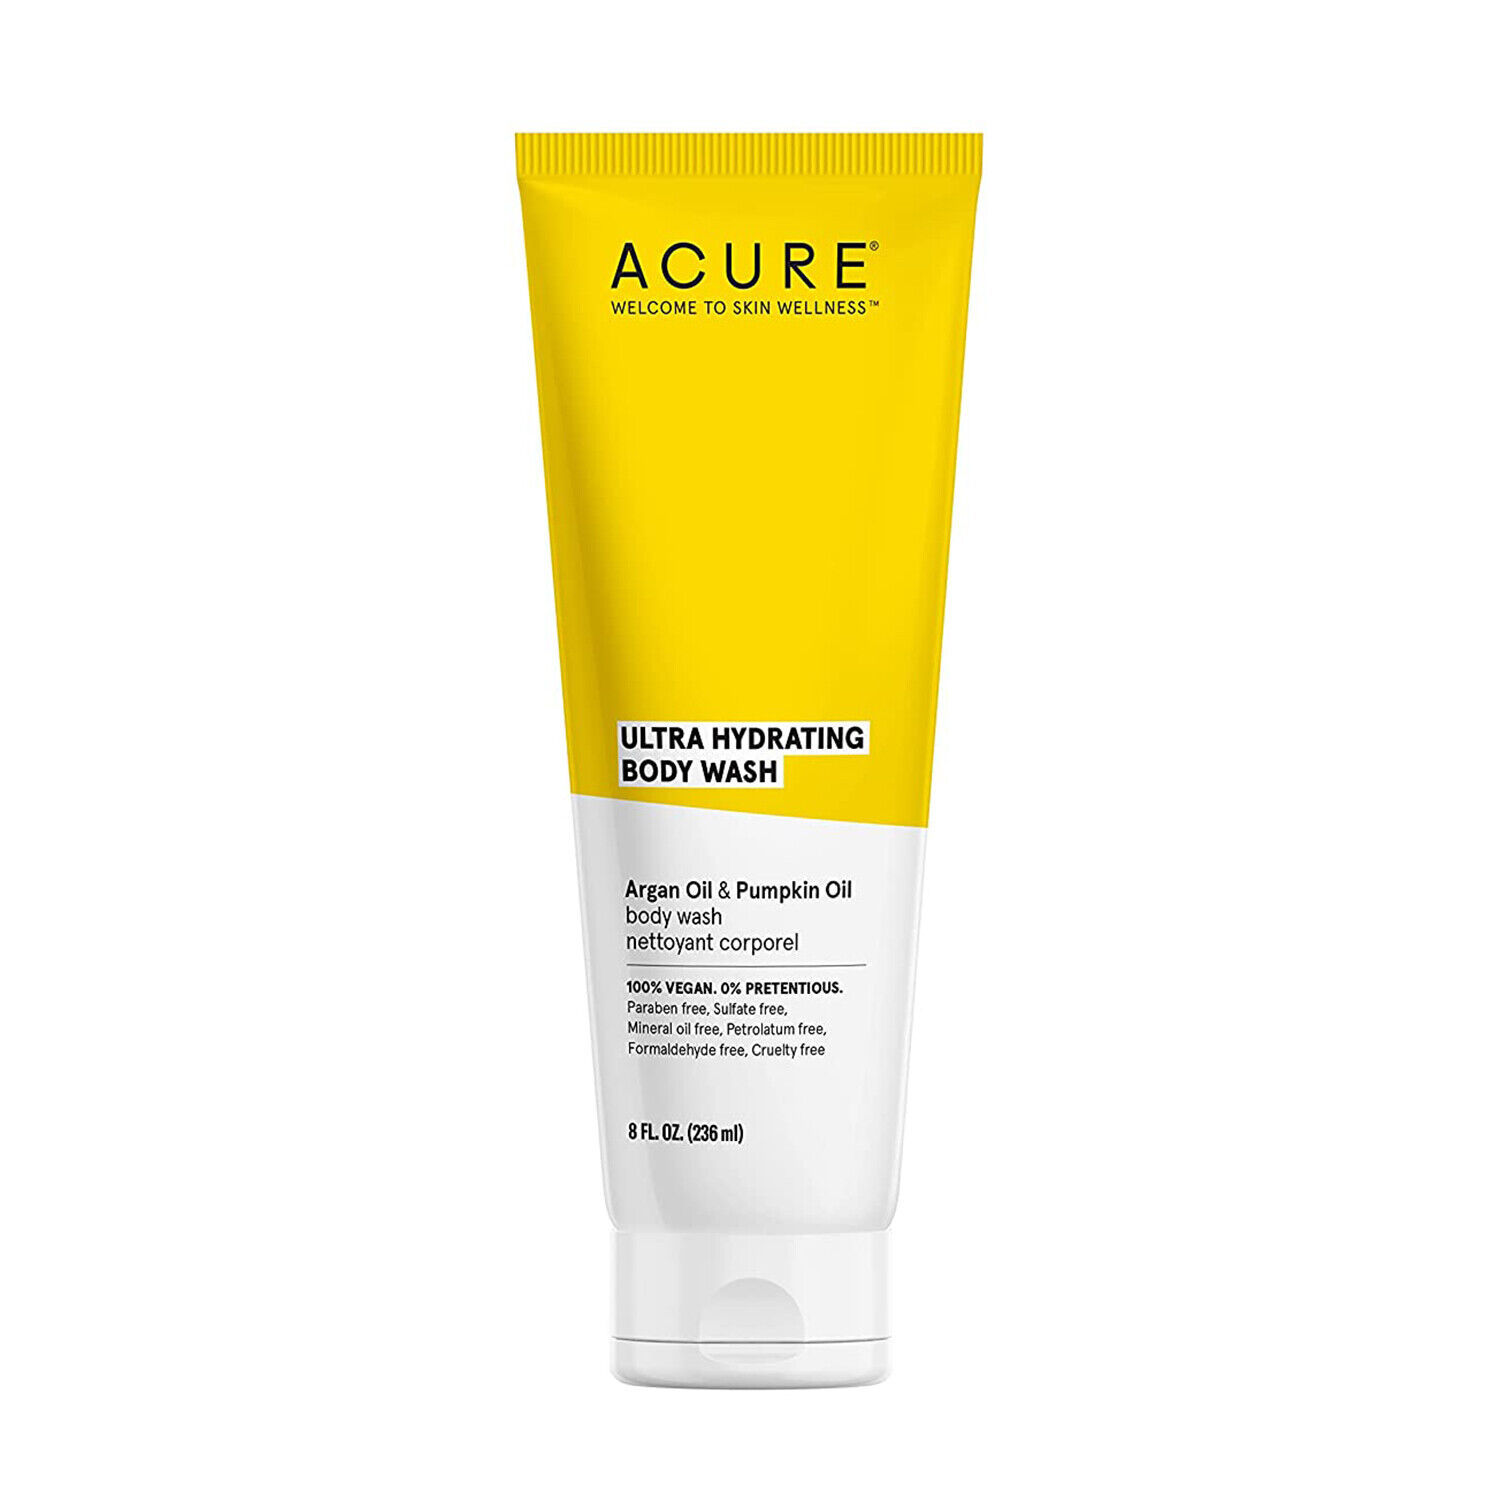 Primary image for Acure Ultra Hydrating Body Wash with Argan Oil & Pumpkin Seed Oil,8 Fluid Oz